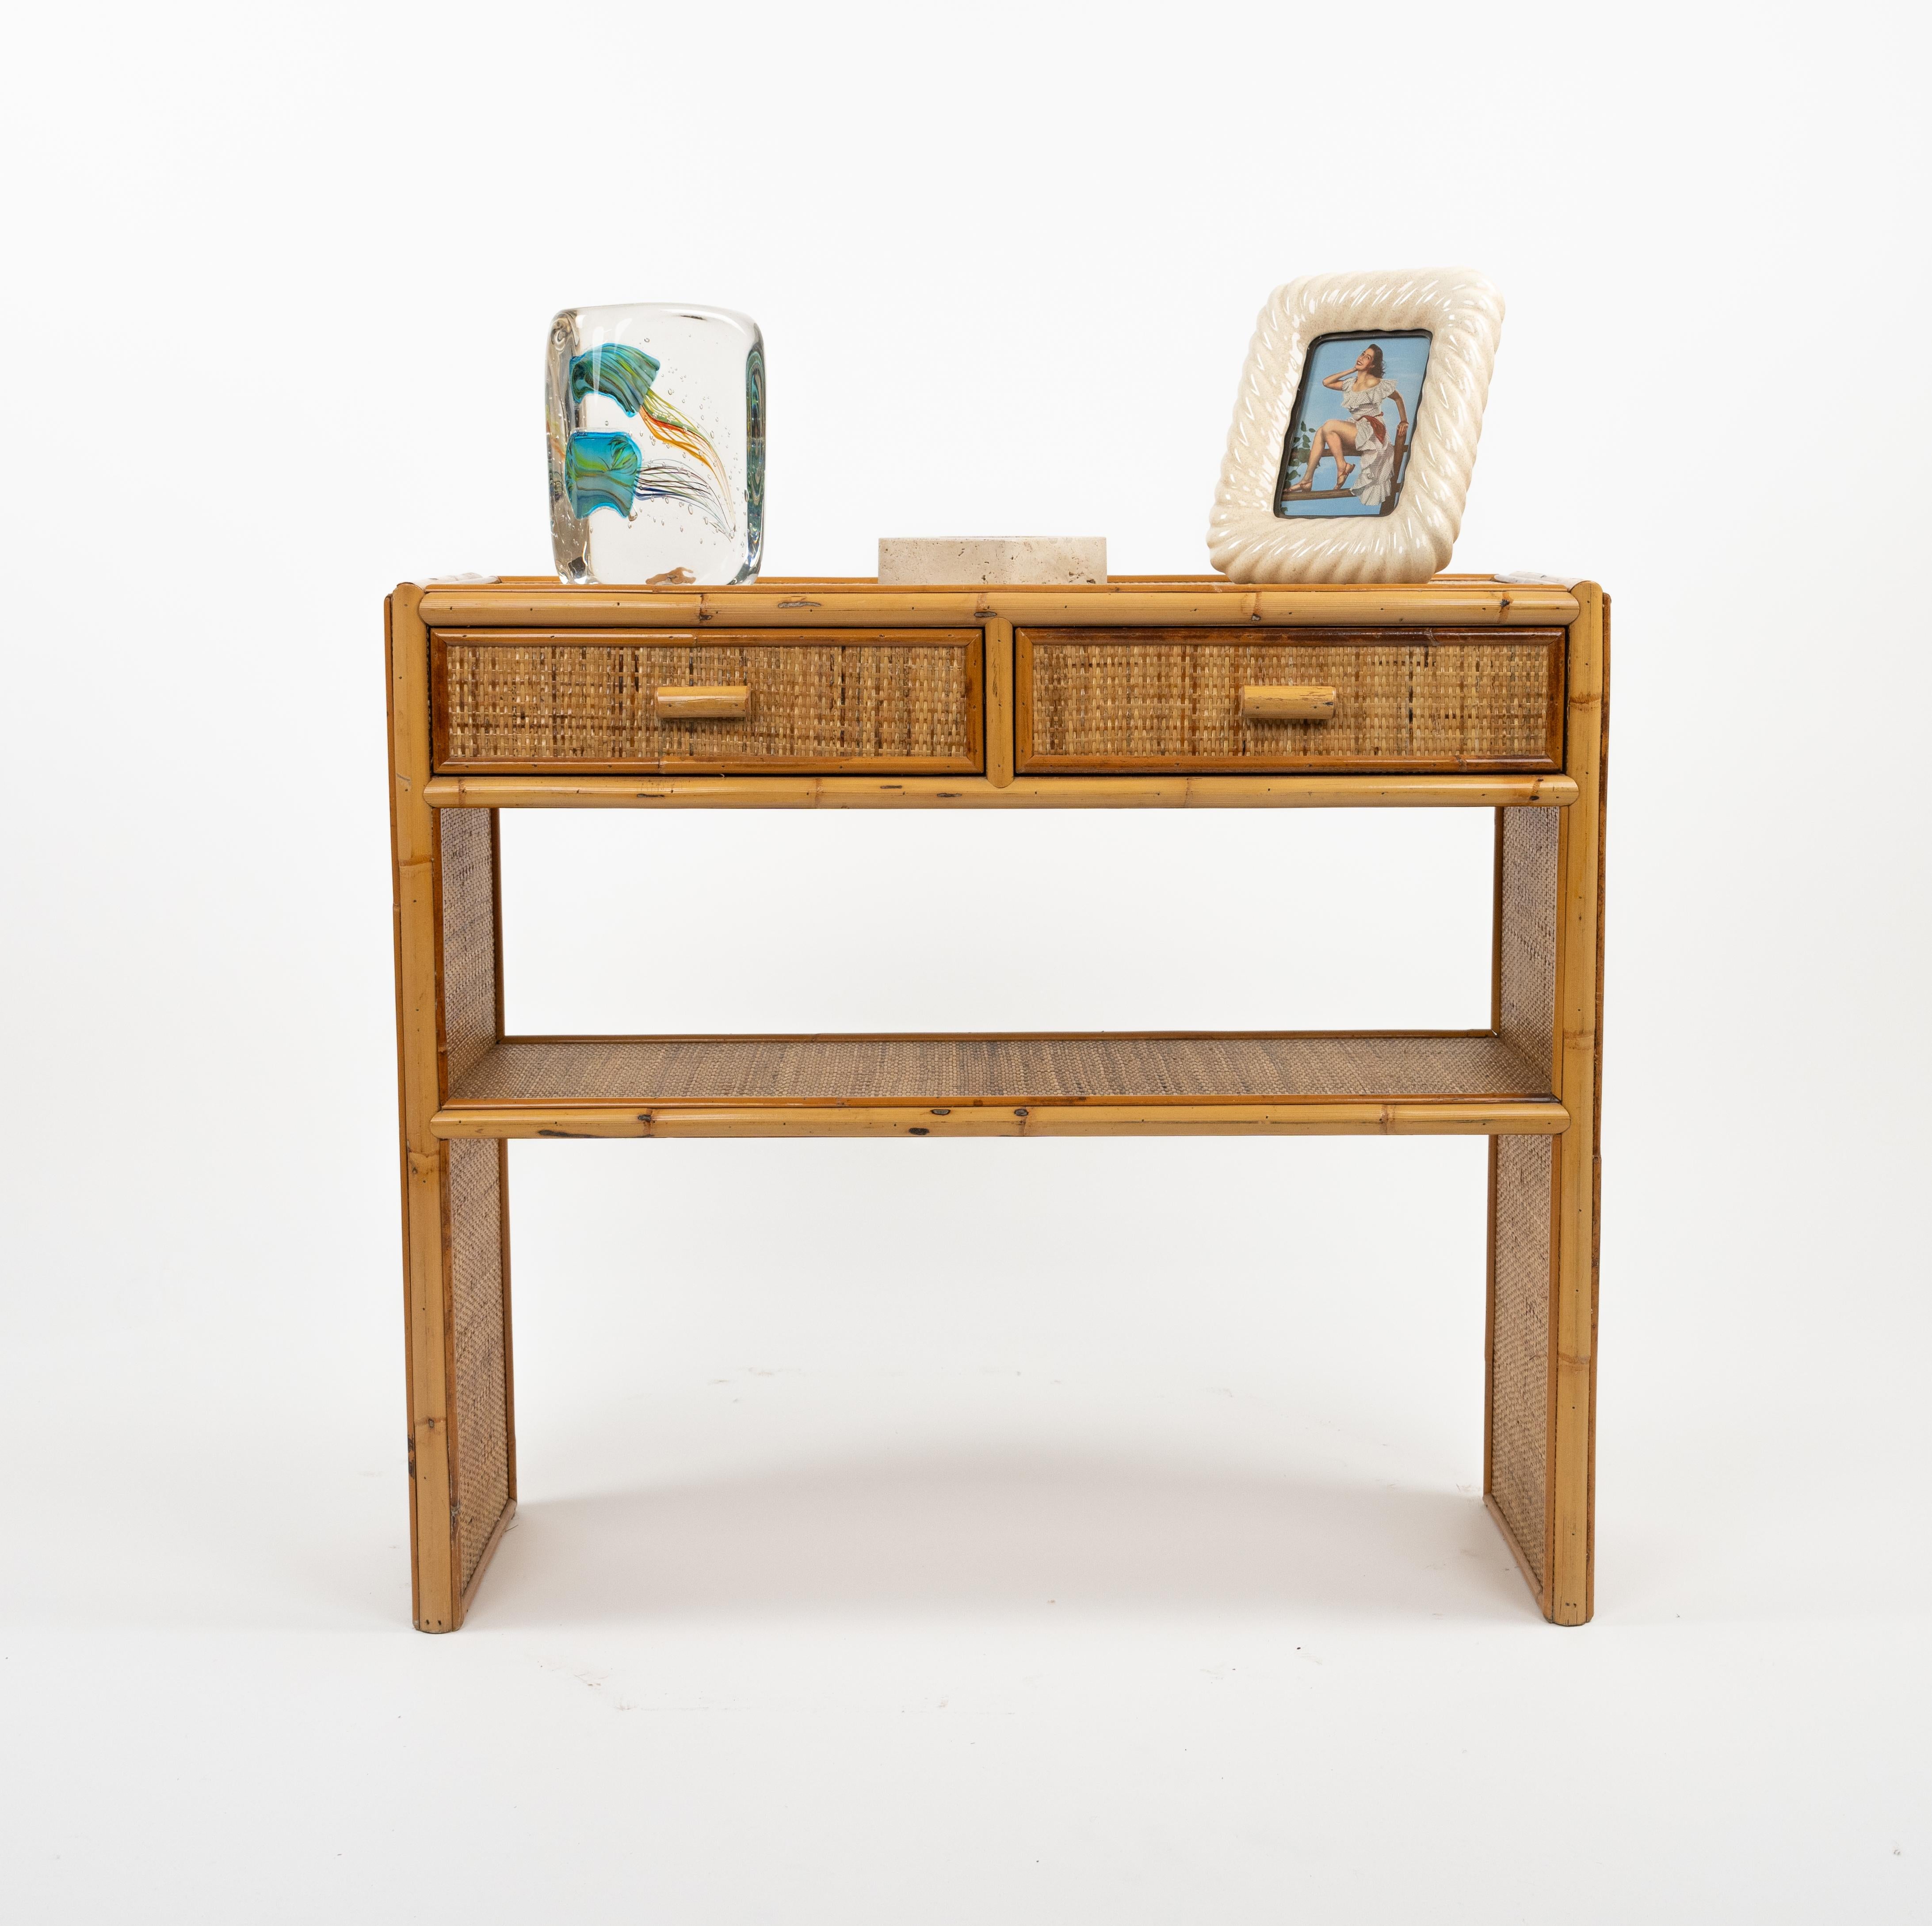 Midcentury Bamboo and Rattan Console Table with Drawers, Italy 1970s For Sale 7